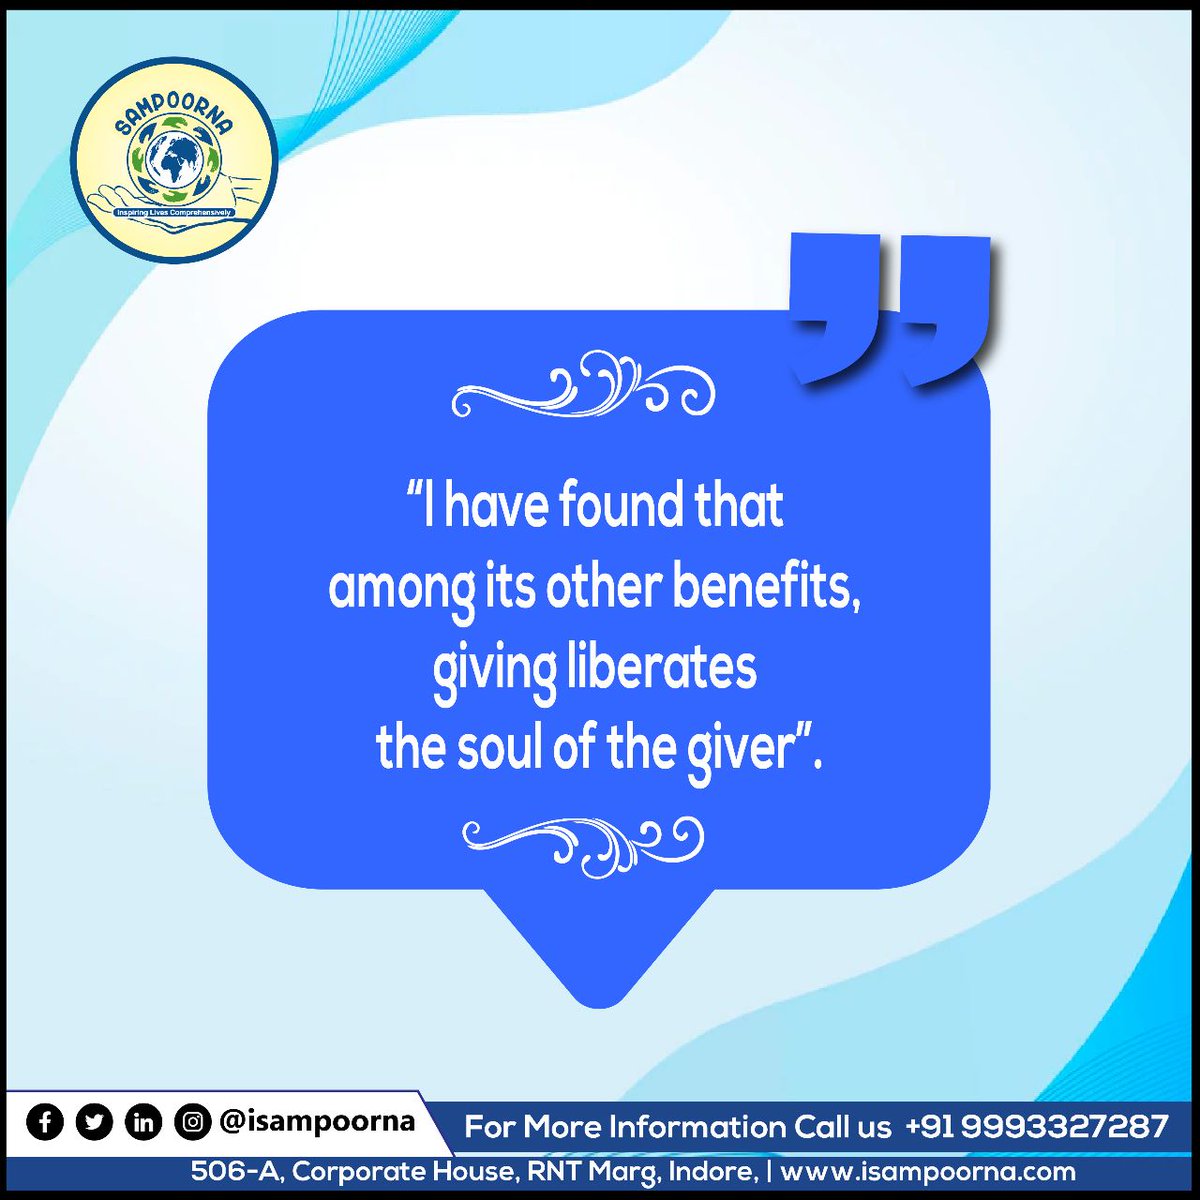 Quote of The Day.
.
#helping #help #love #helpingothers #donatenow #HelpingHands #communityspirit #Sampoorna #ipriyankbanthia #sampoornacommunity #donationswelcome #cards